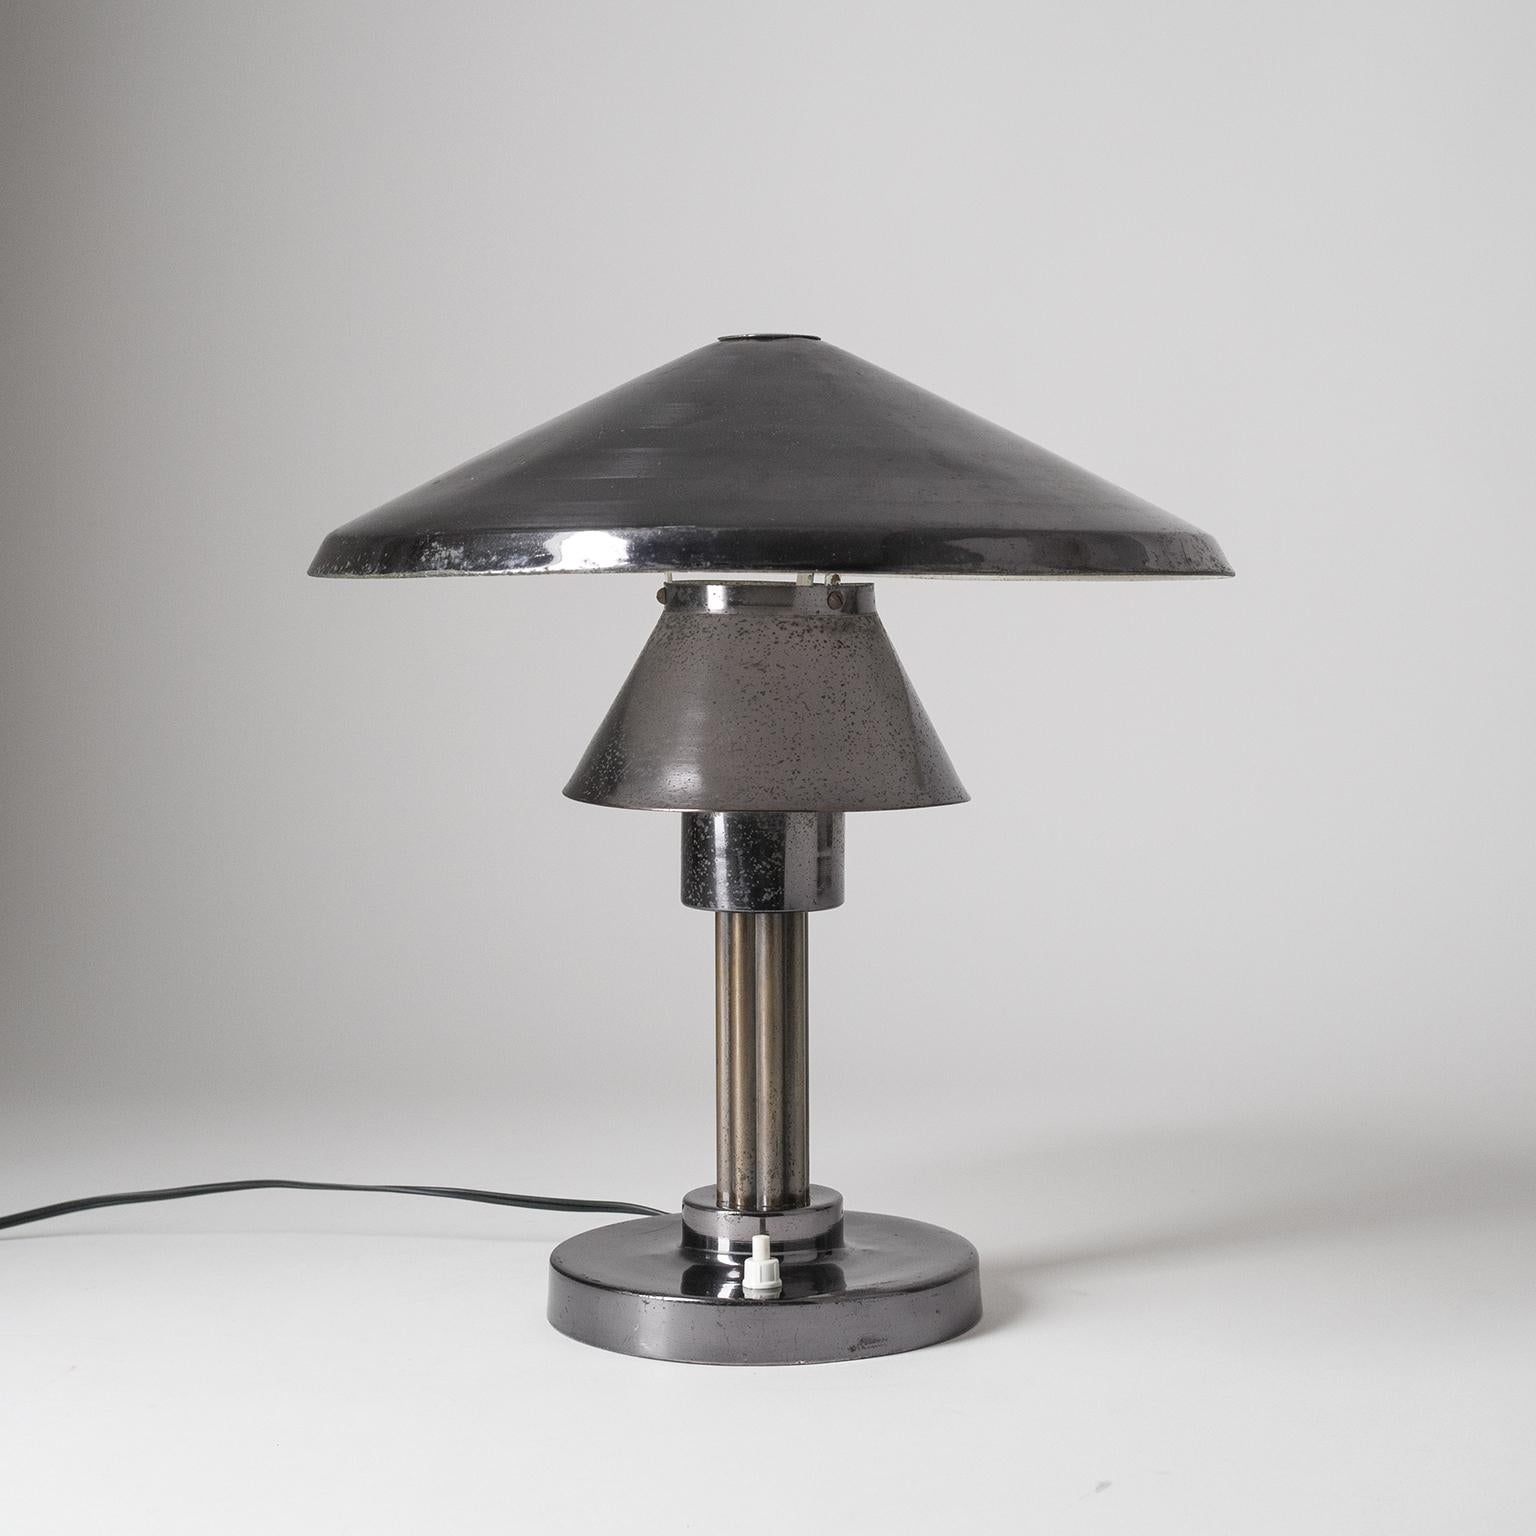 Italian Desk Lamp, 1950s, Patinated Nickel For Sale 3